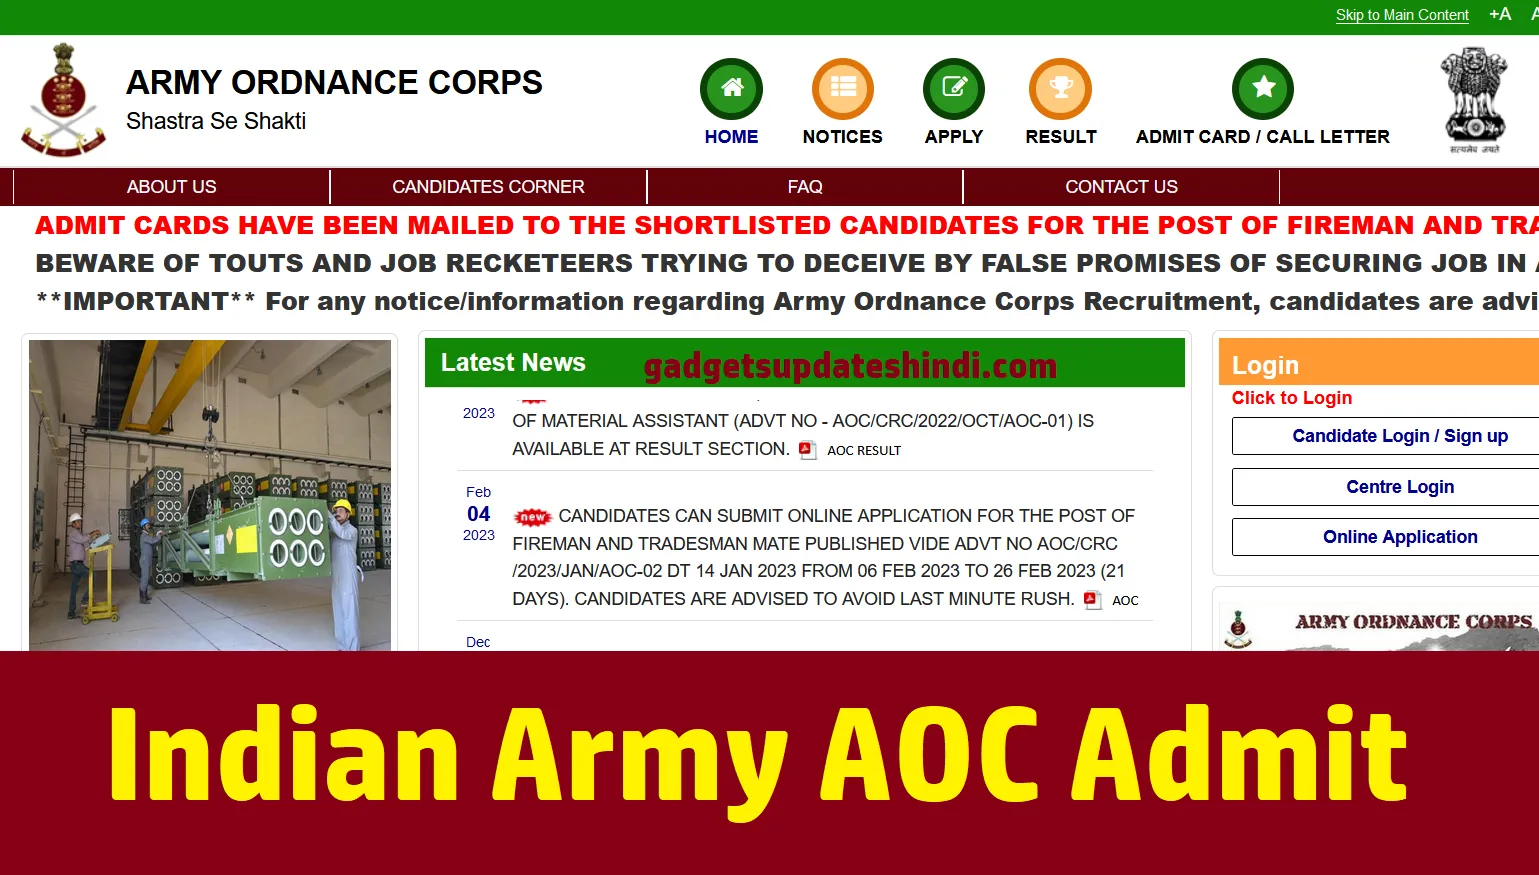 Indian Army AOC Admit Card For Physical Test 2023